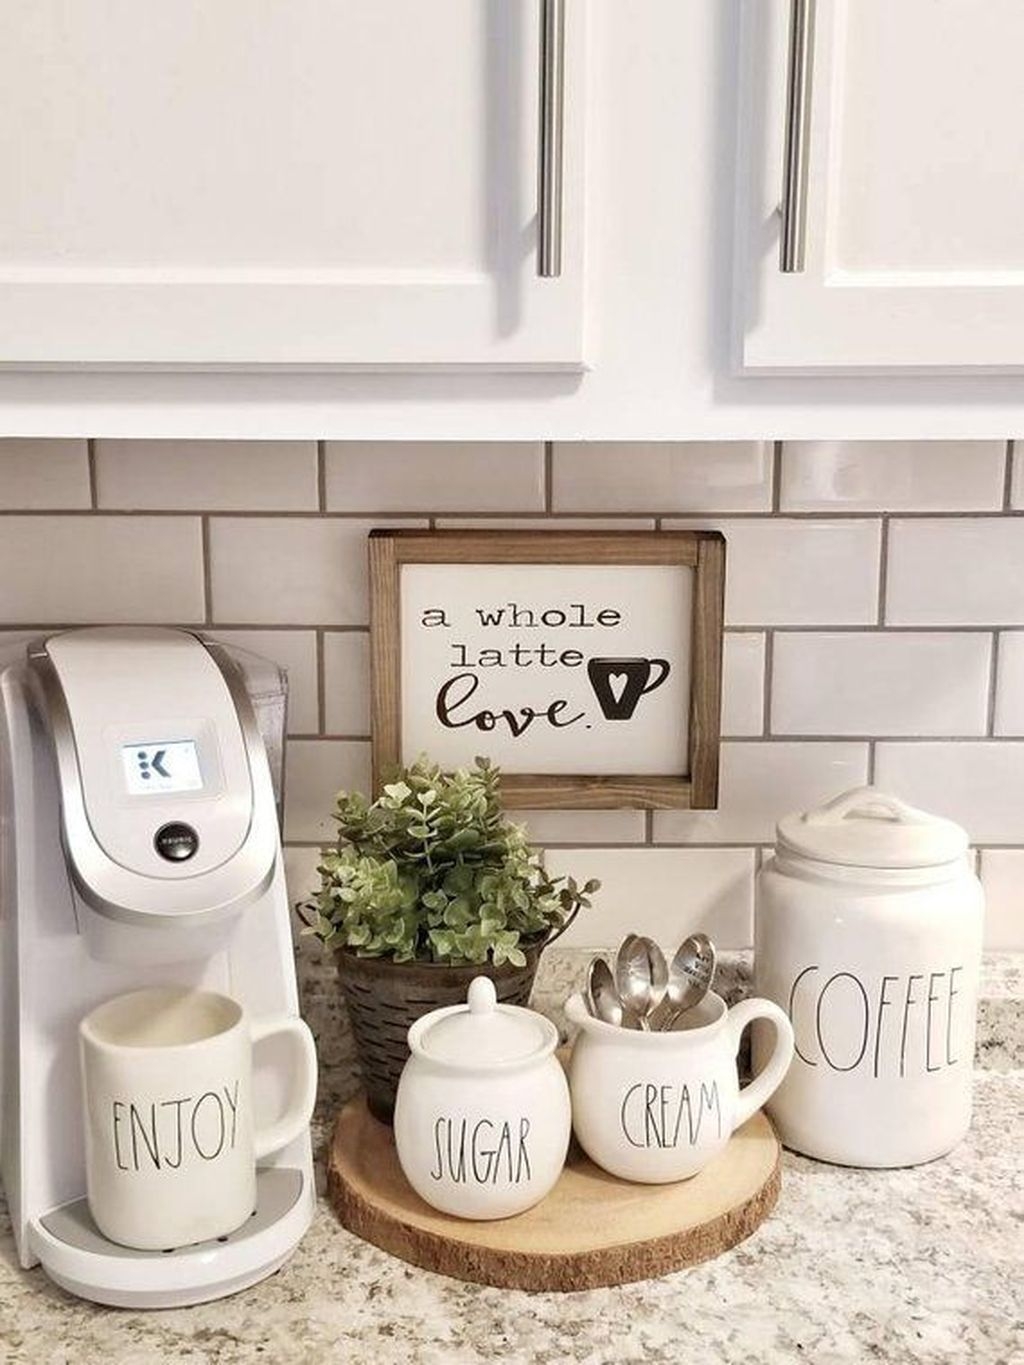 20+ Affordable Diy Mini Coffee Bar Design Ideas For Home Right Now ...